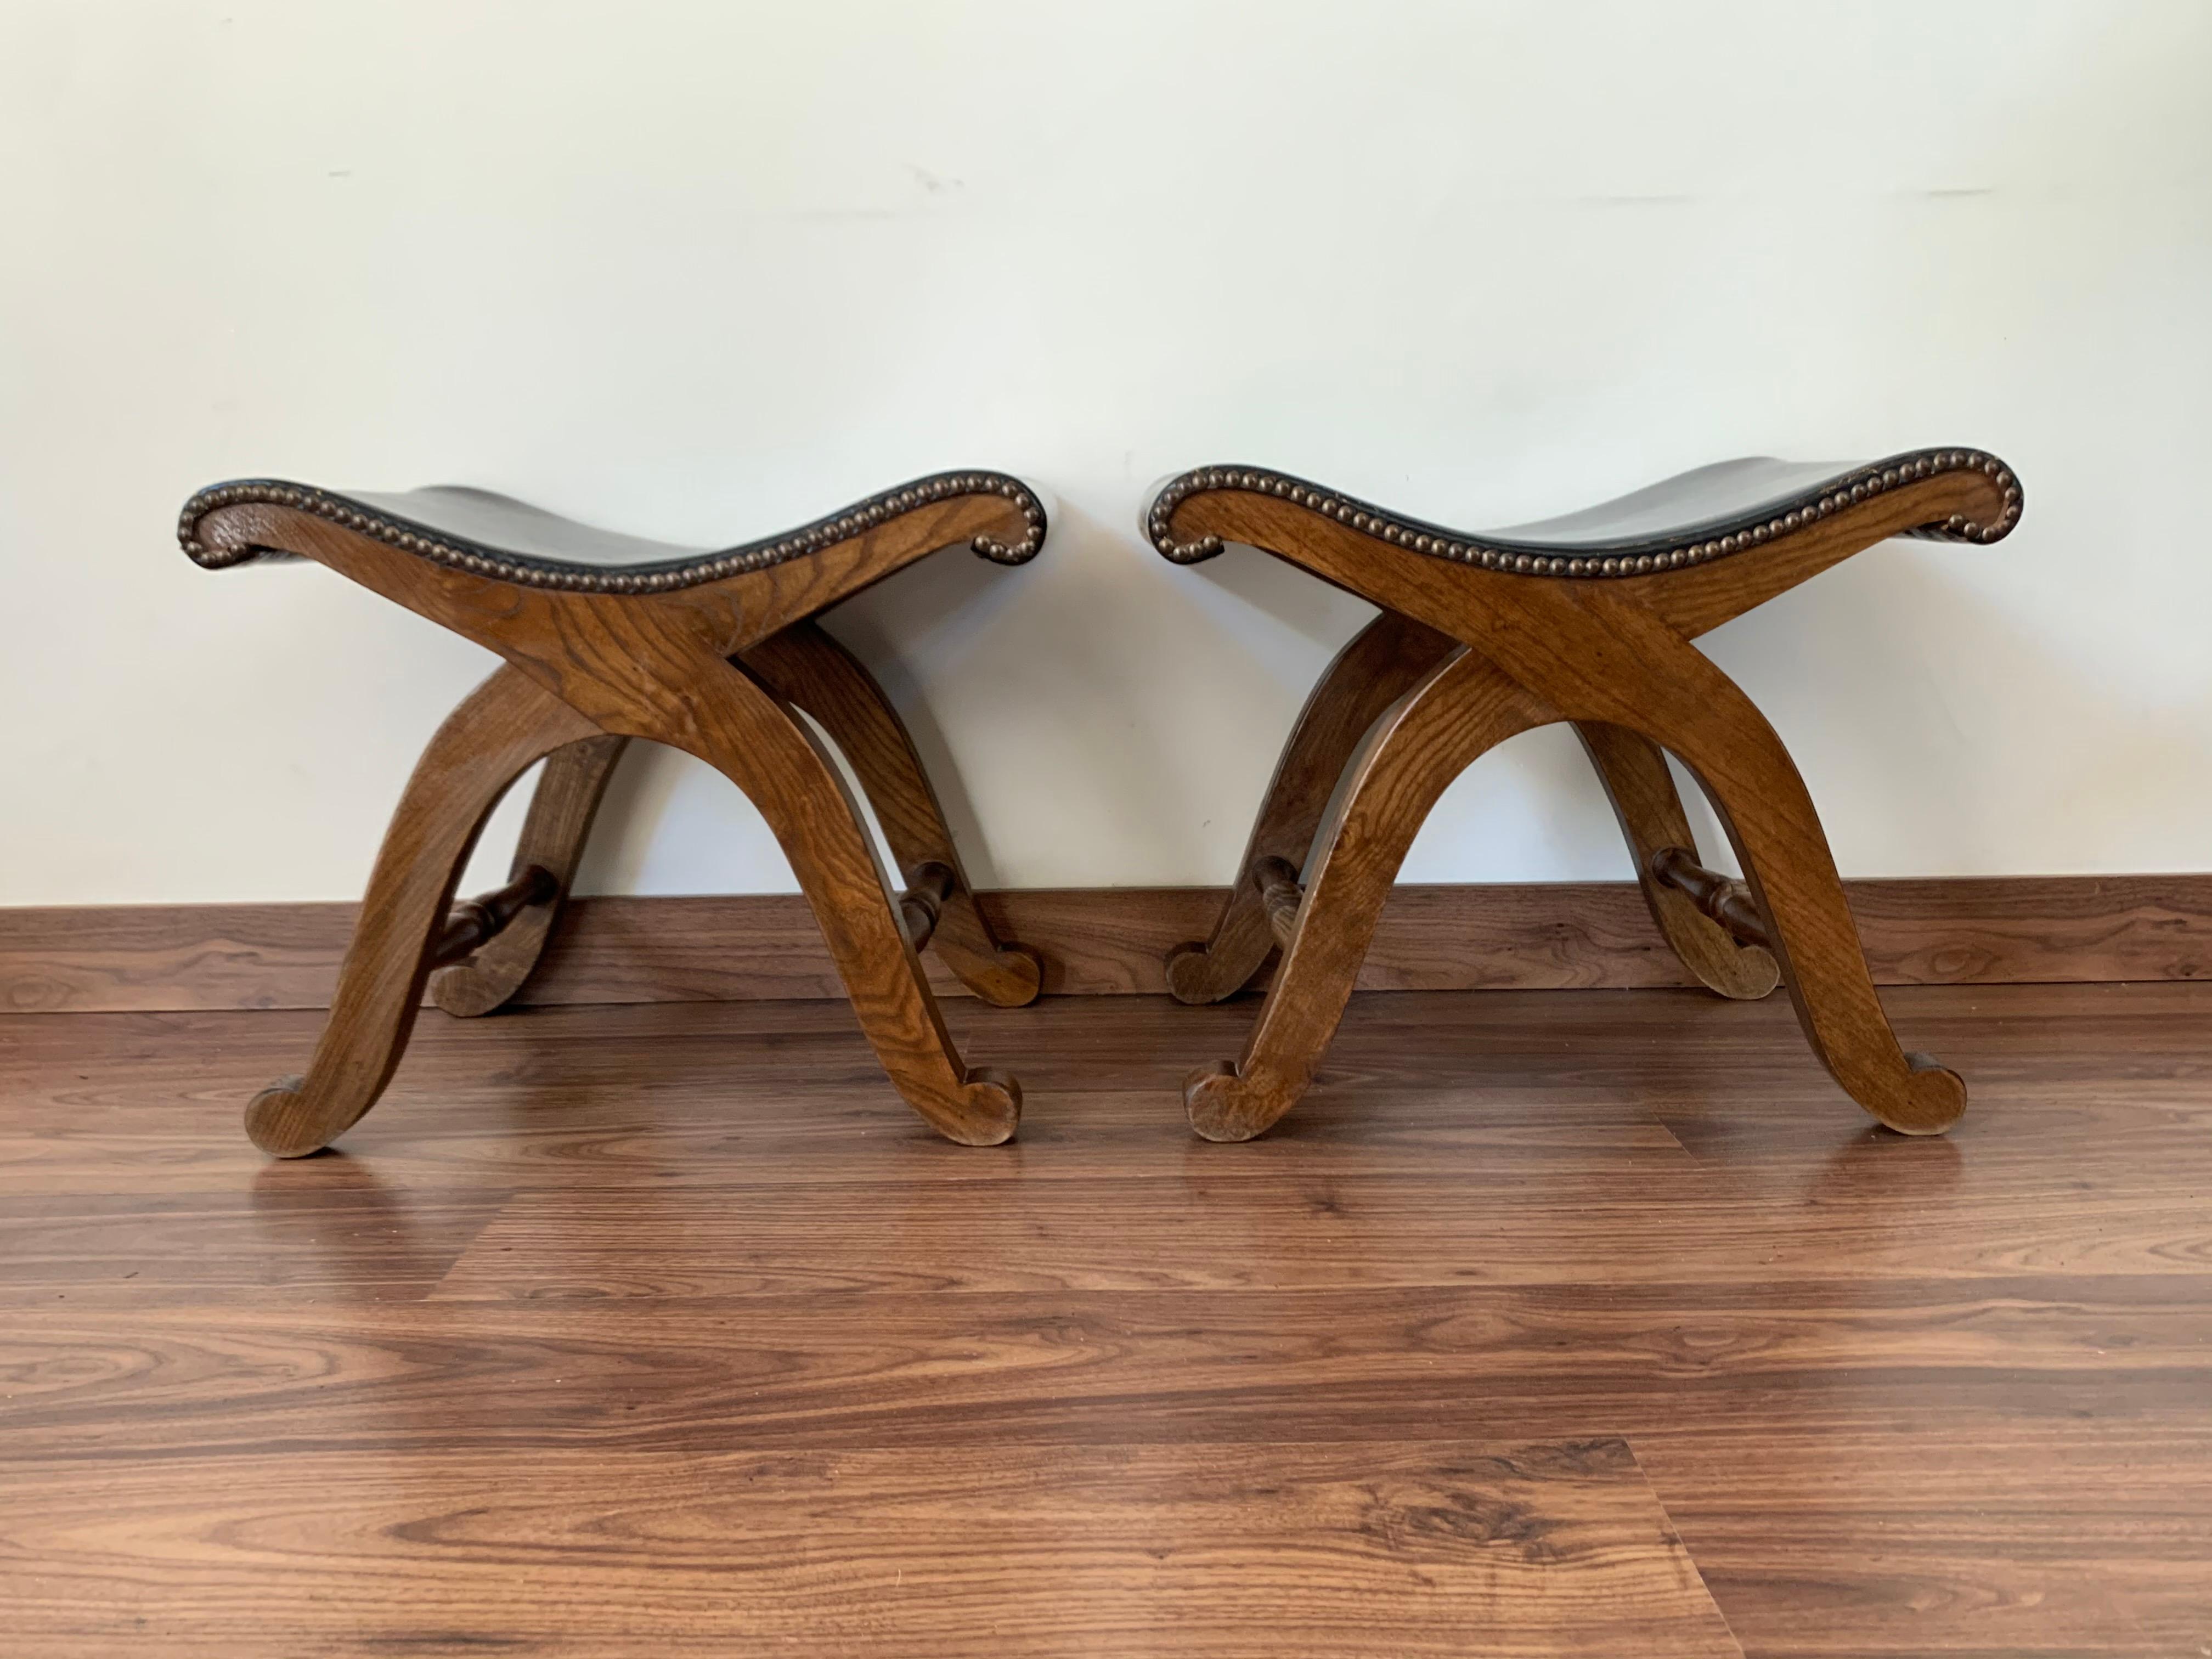 French Provincial French Pair of Foot Stools in Walnut and Black Leather Seat with Tacks